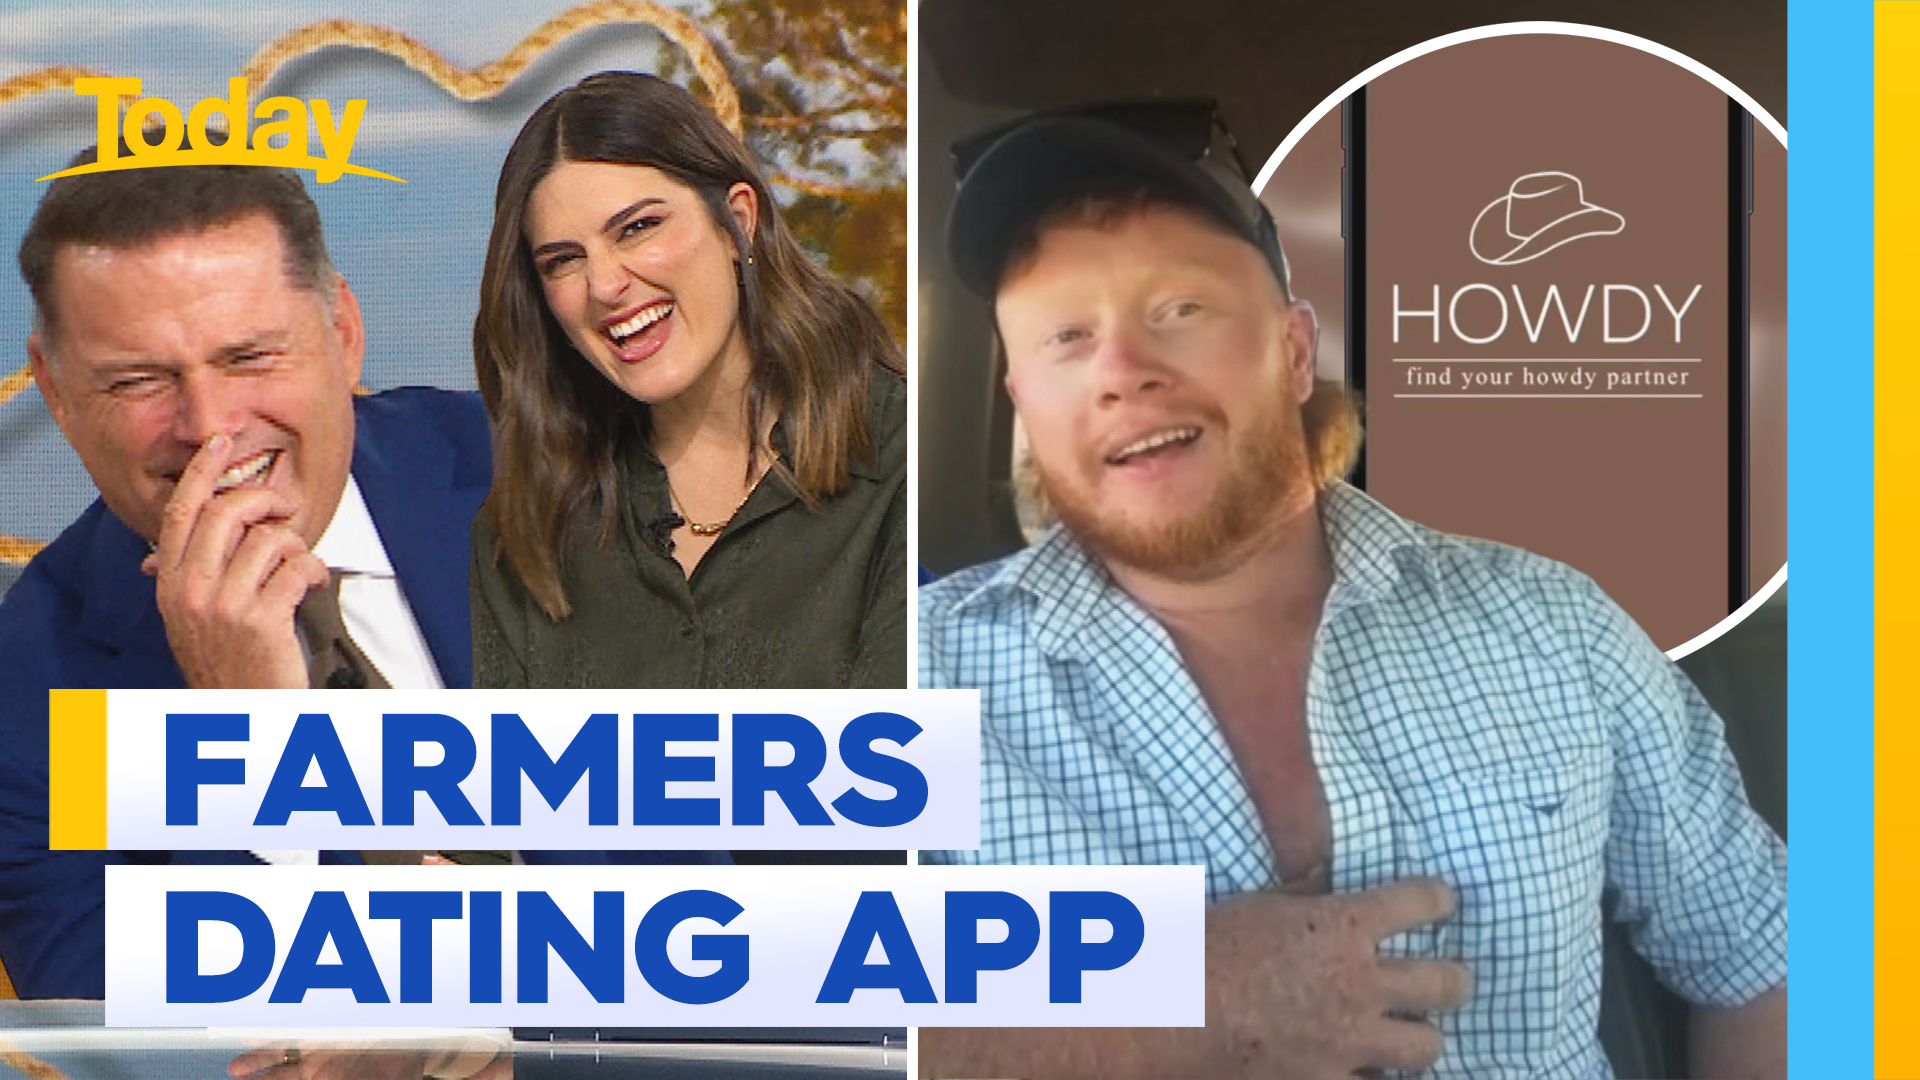 New dating app helping farmers find love